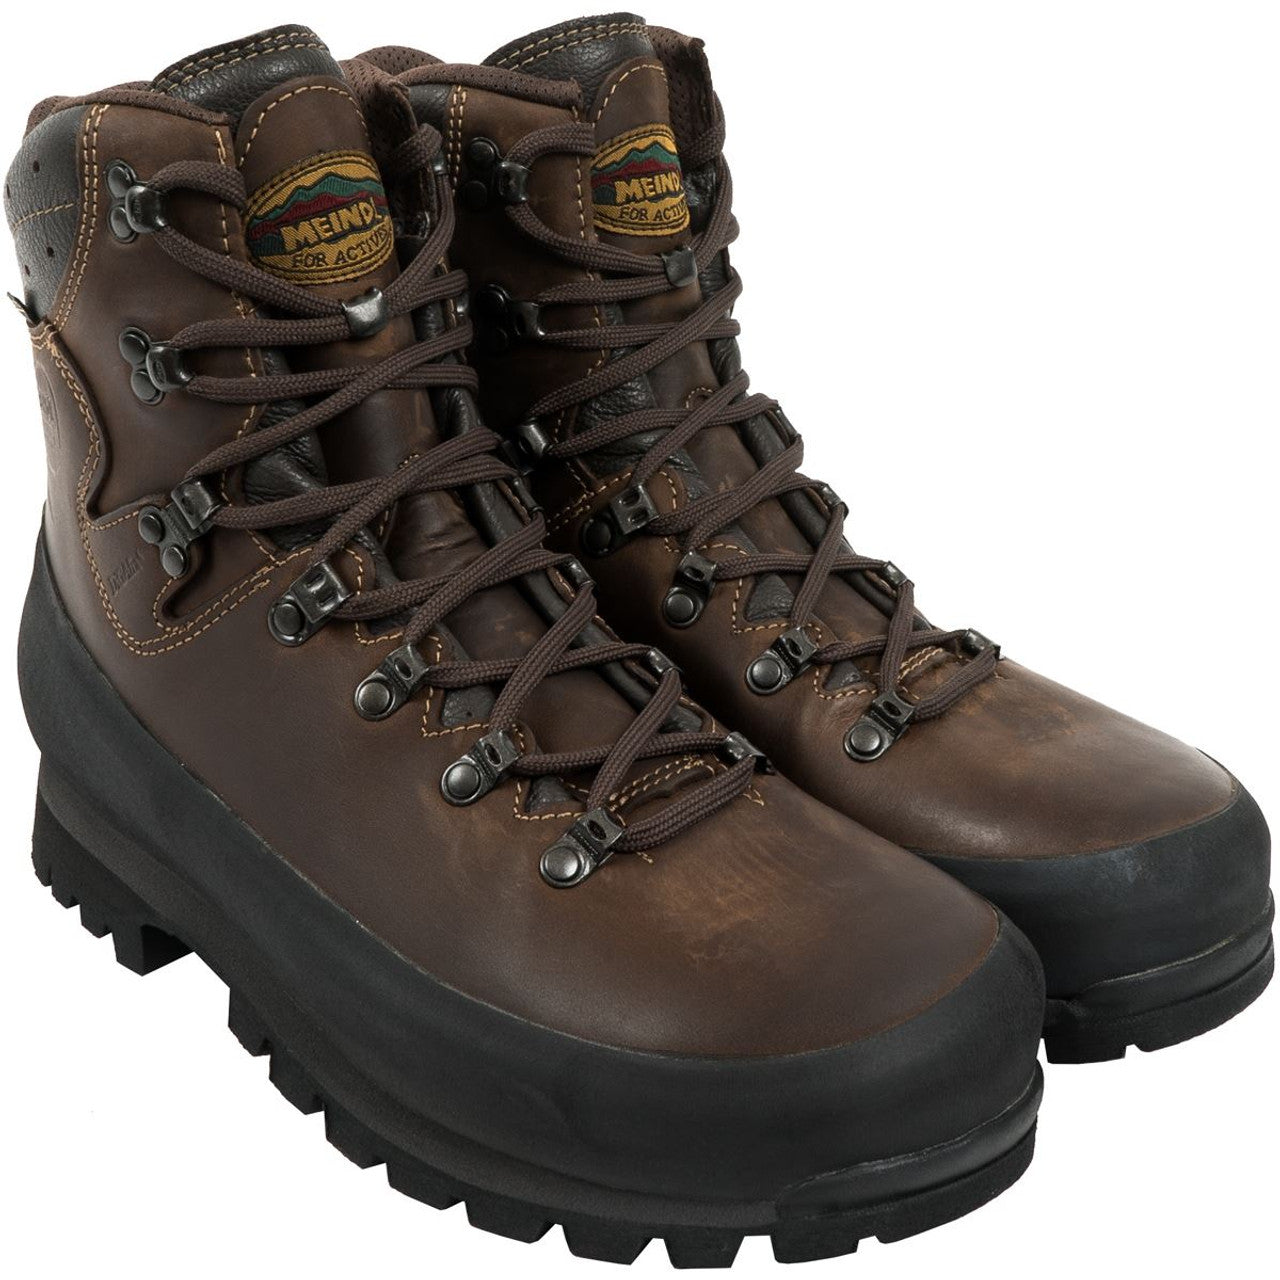 MEINDL Dovre Pro GTX Boots - Mens Gore-Tex Wide Hiking & Hunting Boots - Brown